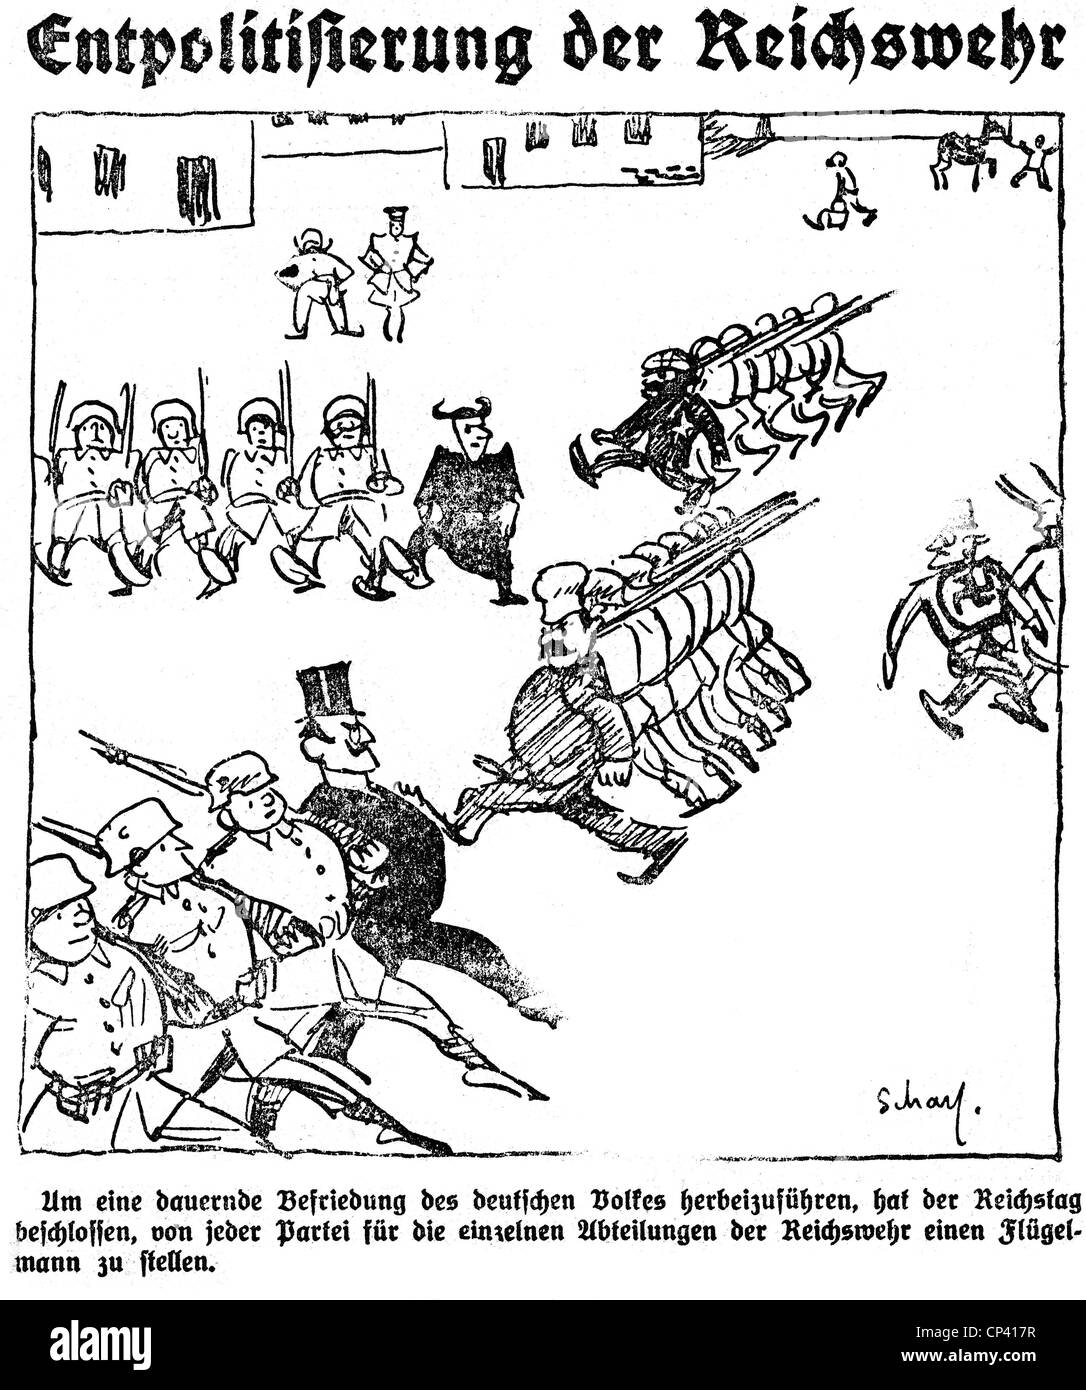 military, Germany, caricature, 'Depoliticising the Reichswehr', drawing by Scharf, 'Welt am Sonntag', 5.1.1926, Additional-Rights-Clearences-Not Available Stock Photo